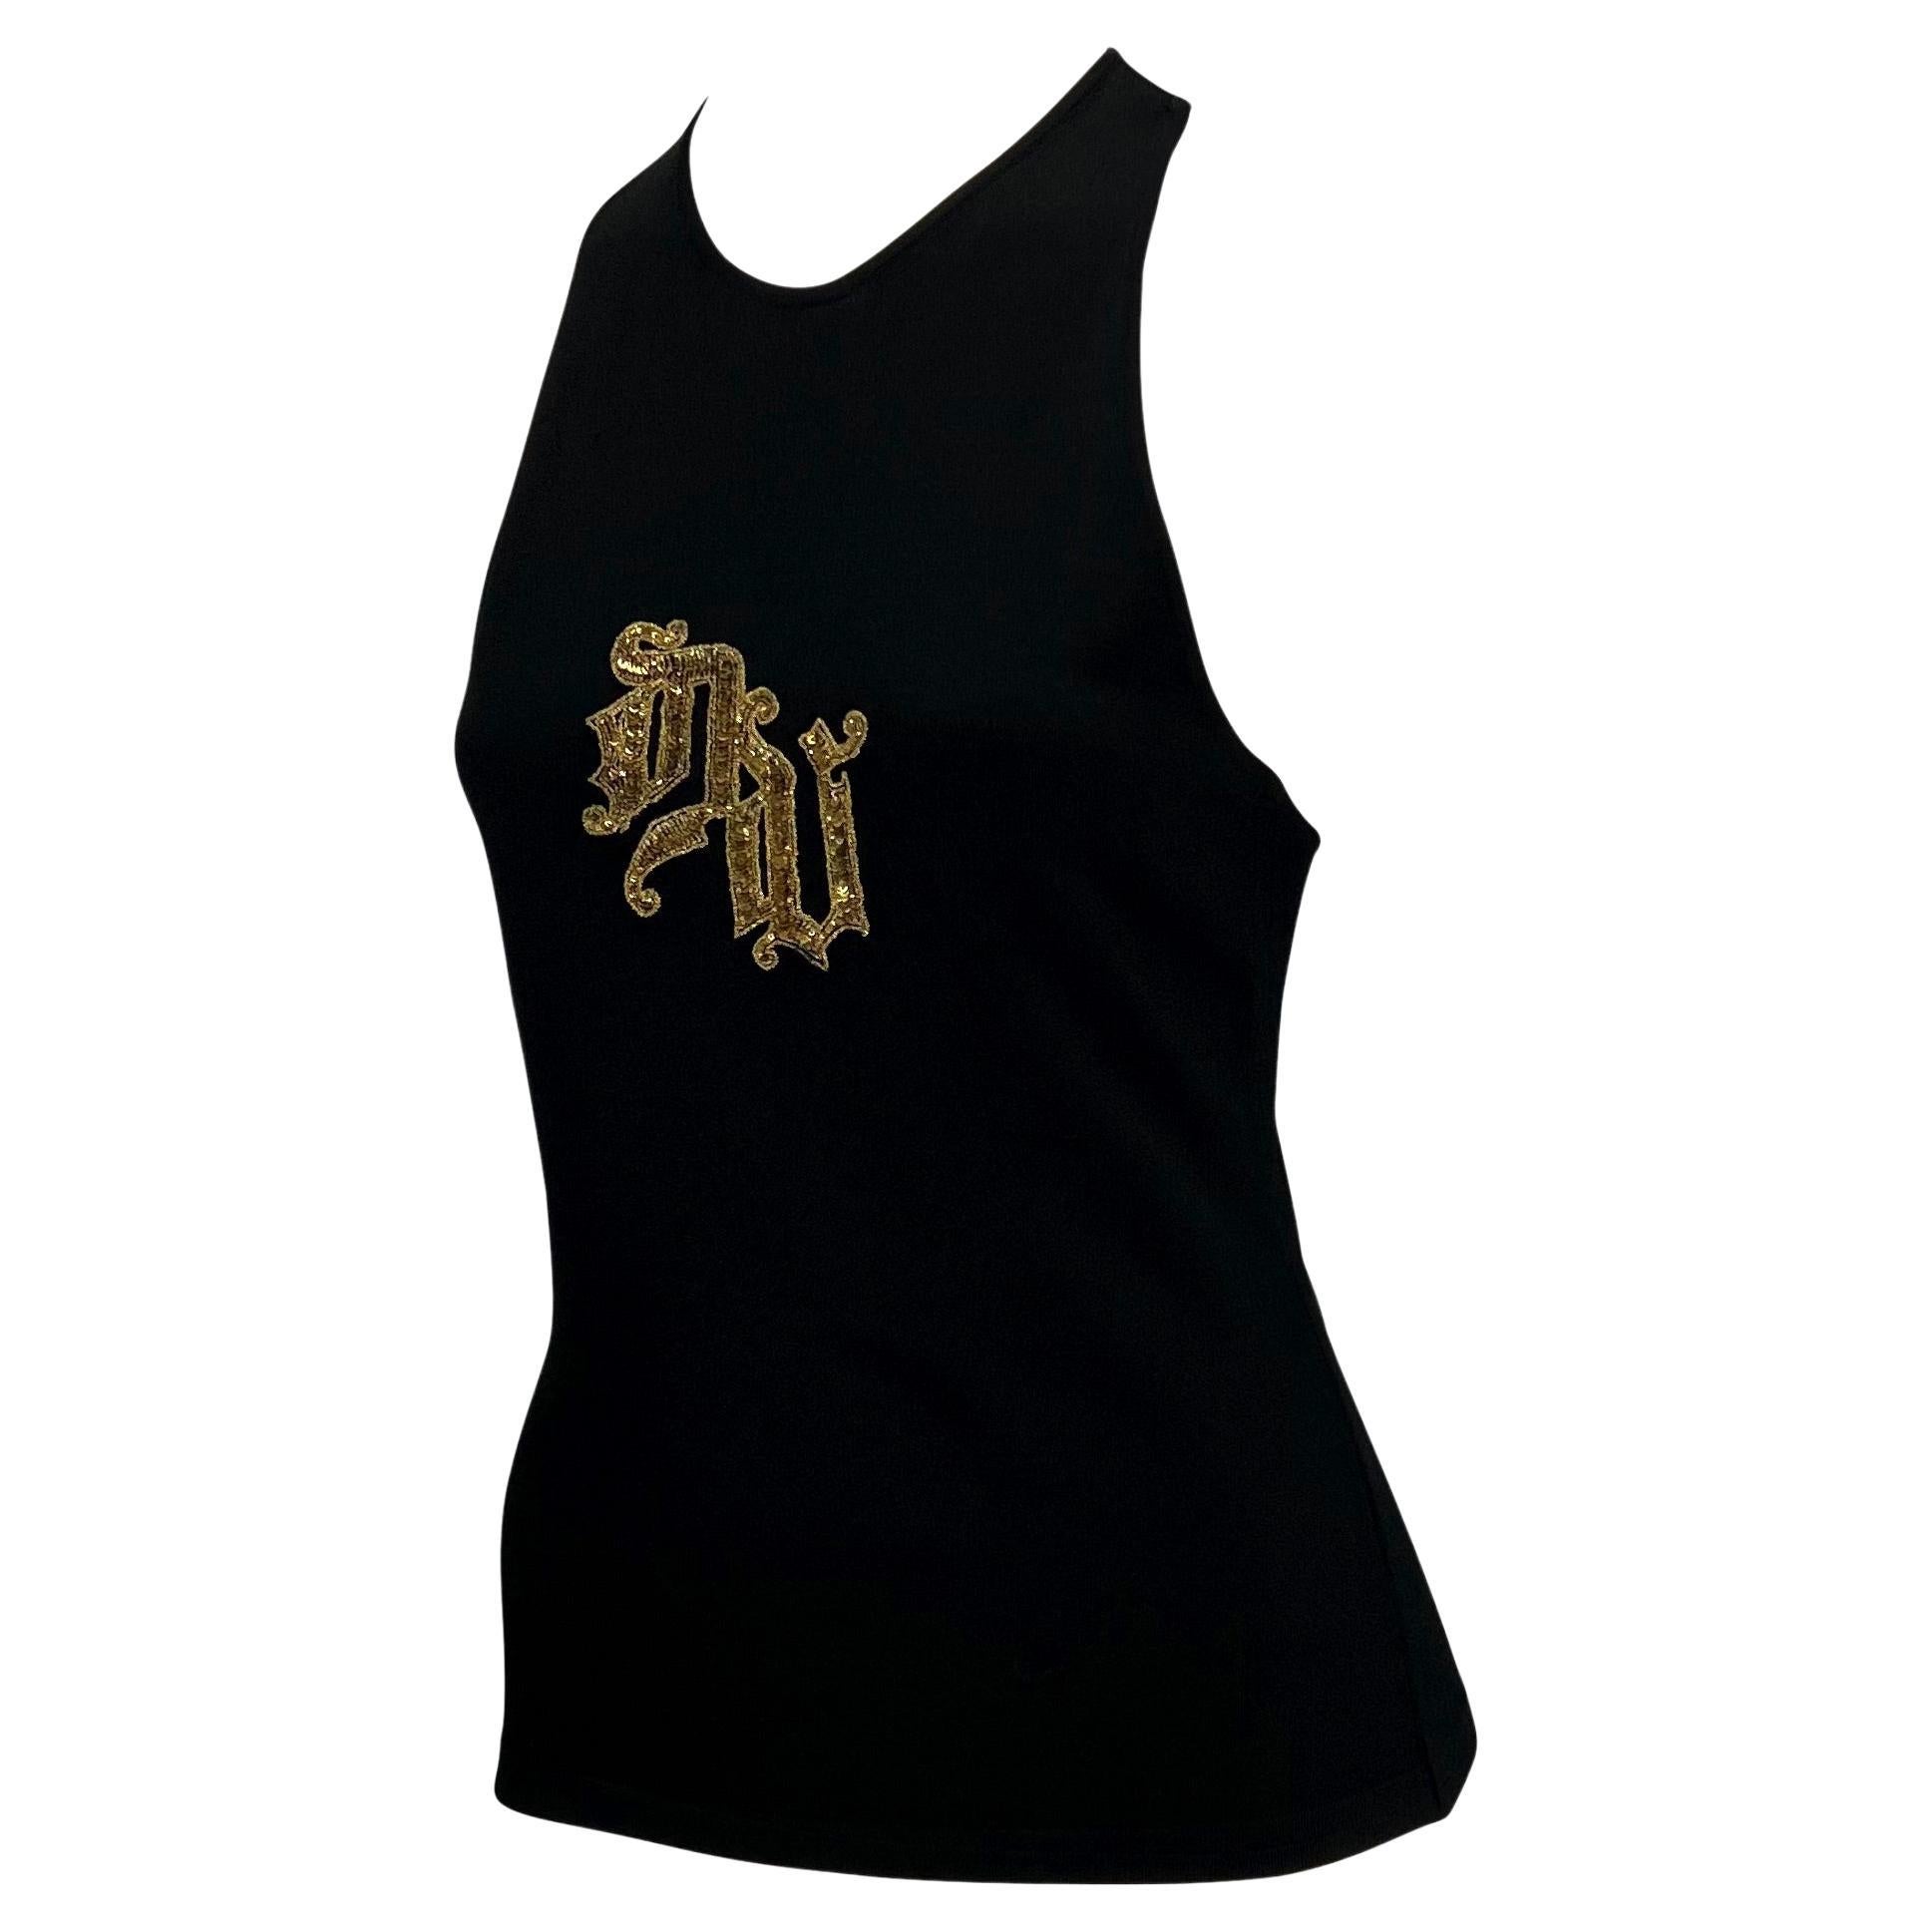 Presenting a curve-hugging racerback Versace top designed by Donatella in the early 2000s. The bust features sequin embroidery to form Donatella's DV monogram logo. This piece is a fabulous representation of Donatella's ability to honor her